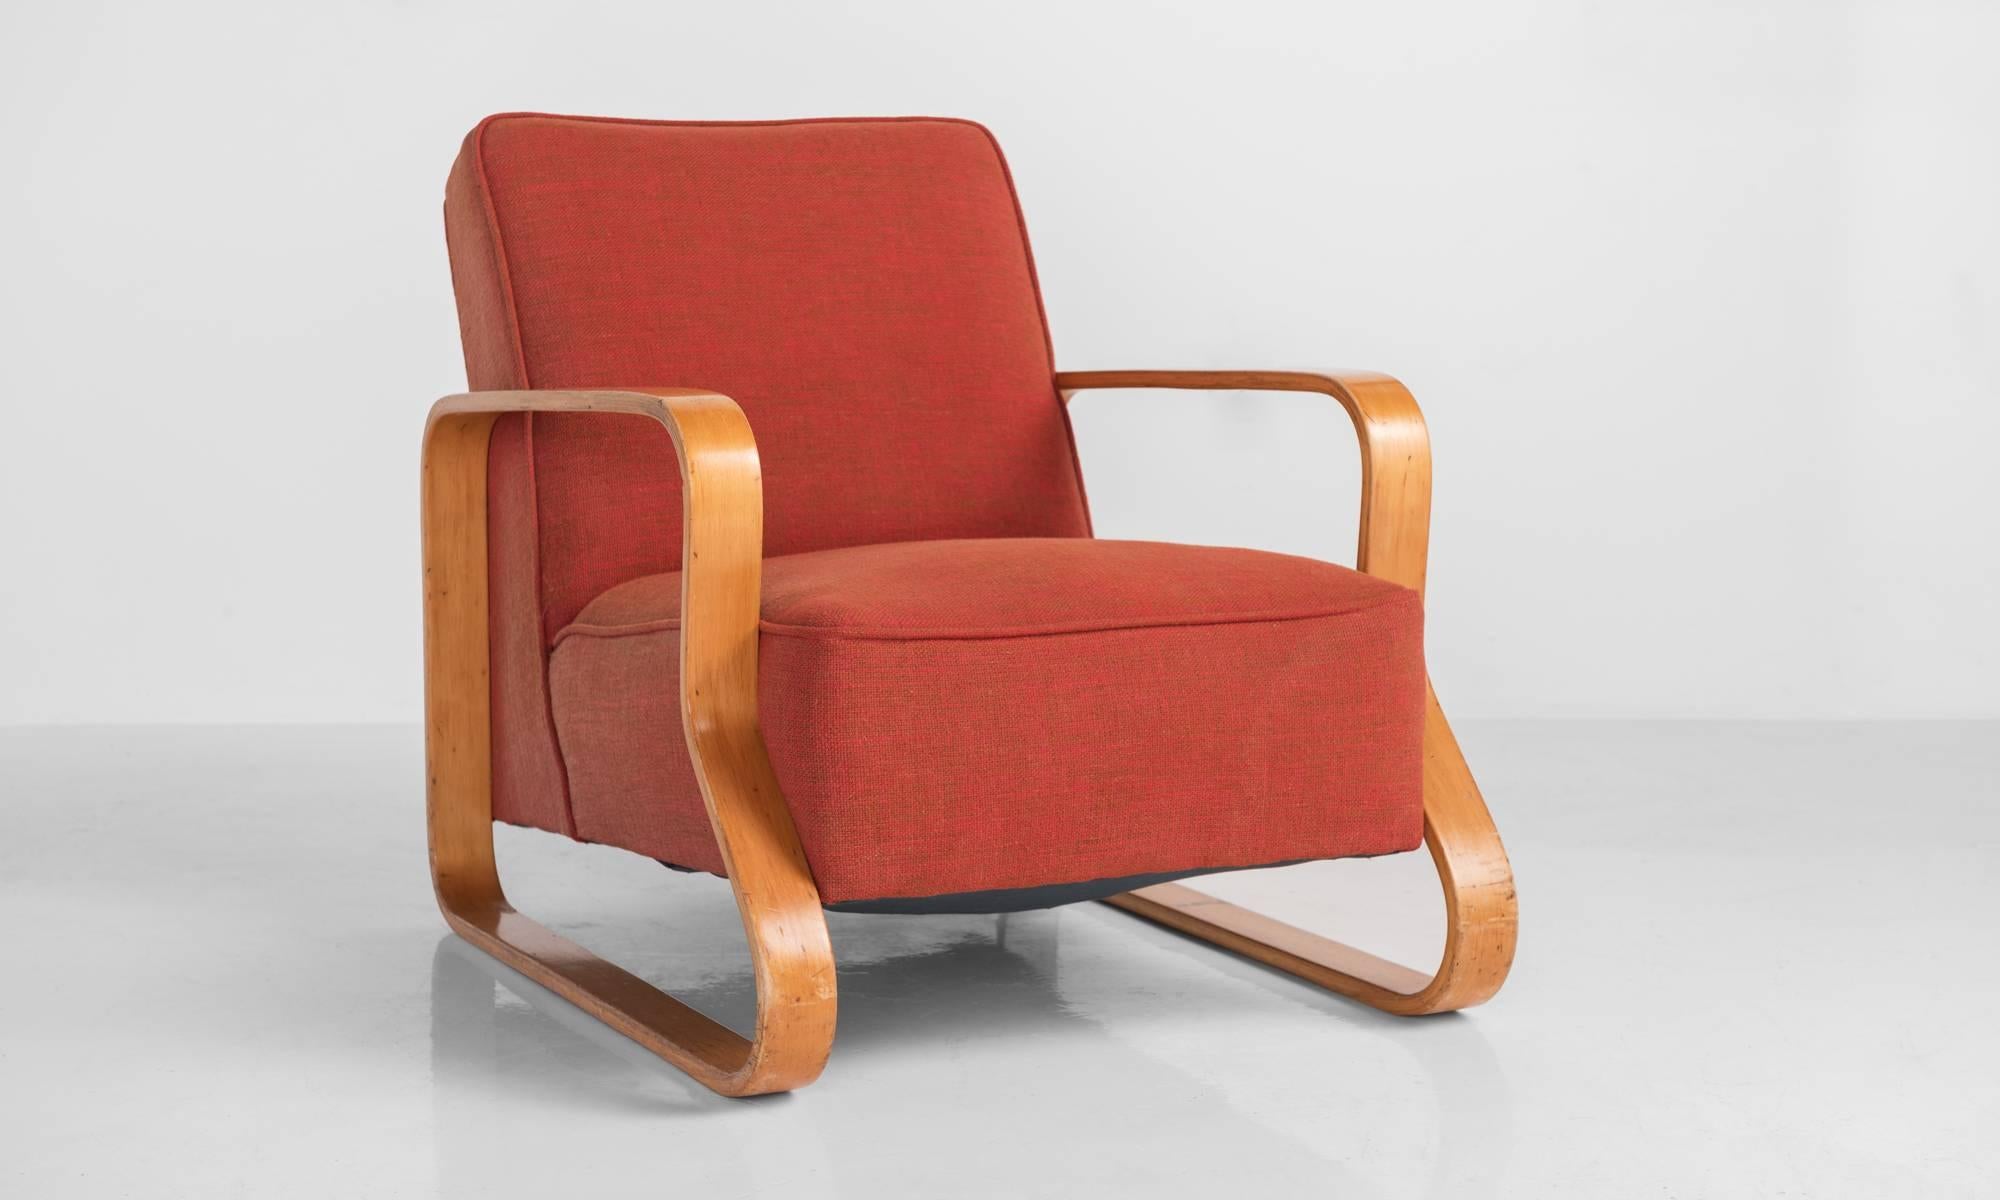 Bentwood Model 44 Lounge Chair by Alvar Aalto, circa 1930